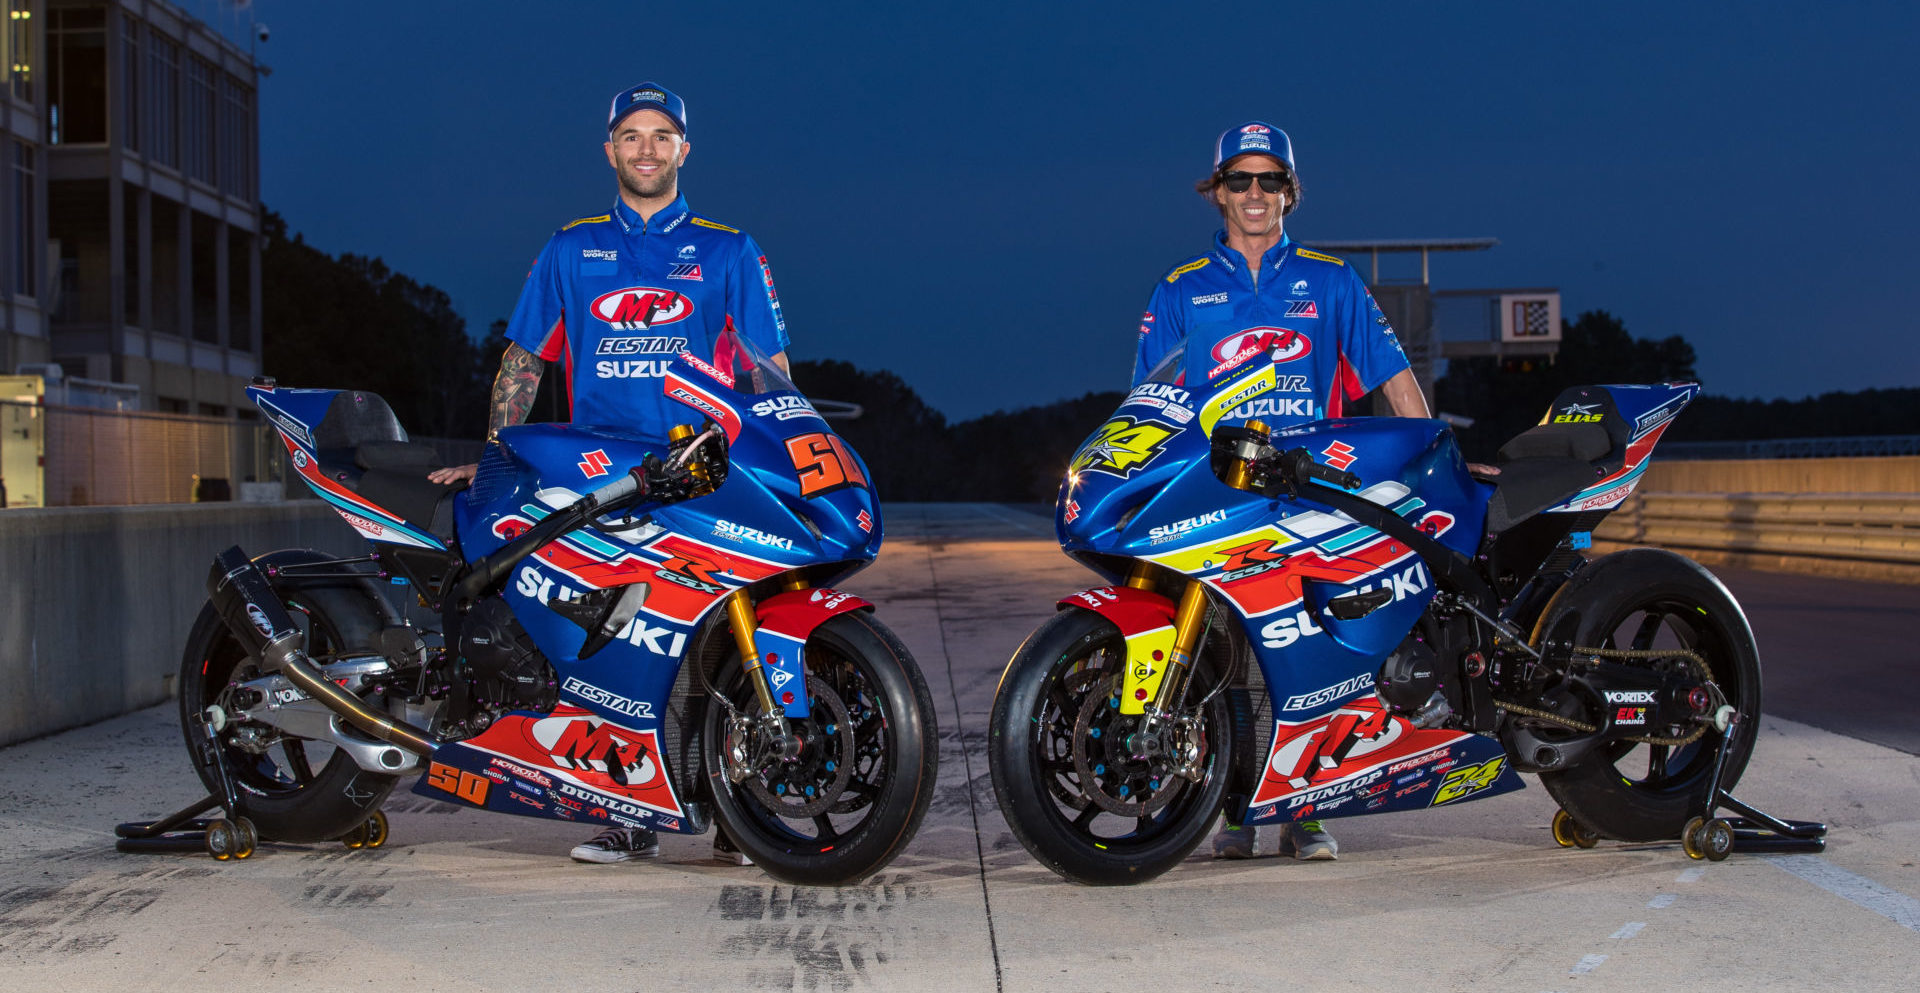 M4 ECSTAR Suzuki Superbike Riders Bobby Fong #50 (left) and Toni Elias #24 (right). Photo by Brian J. Nelson.